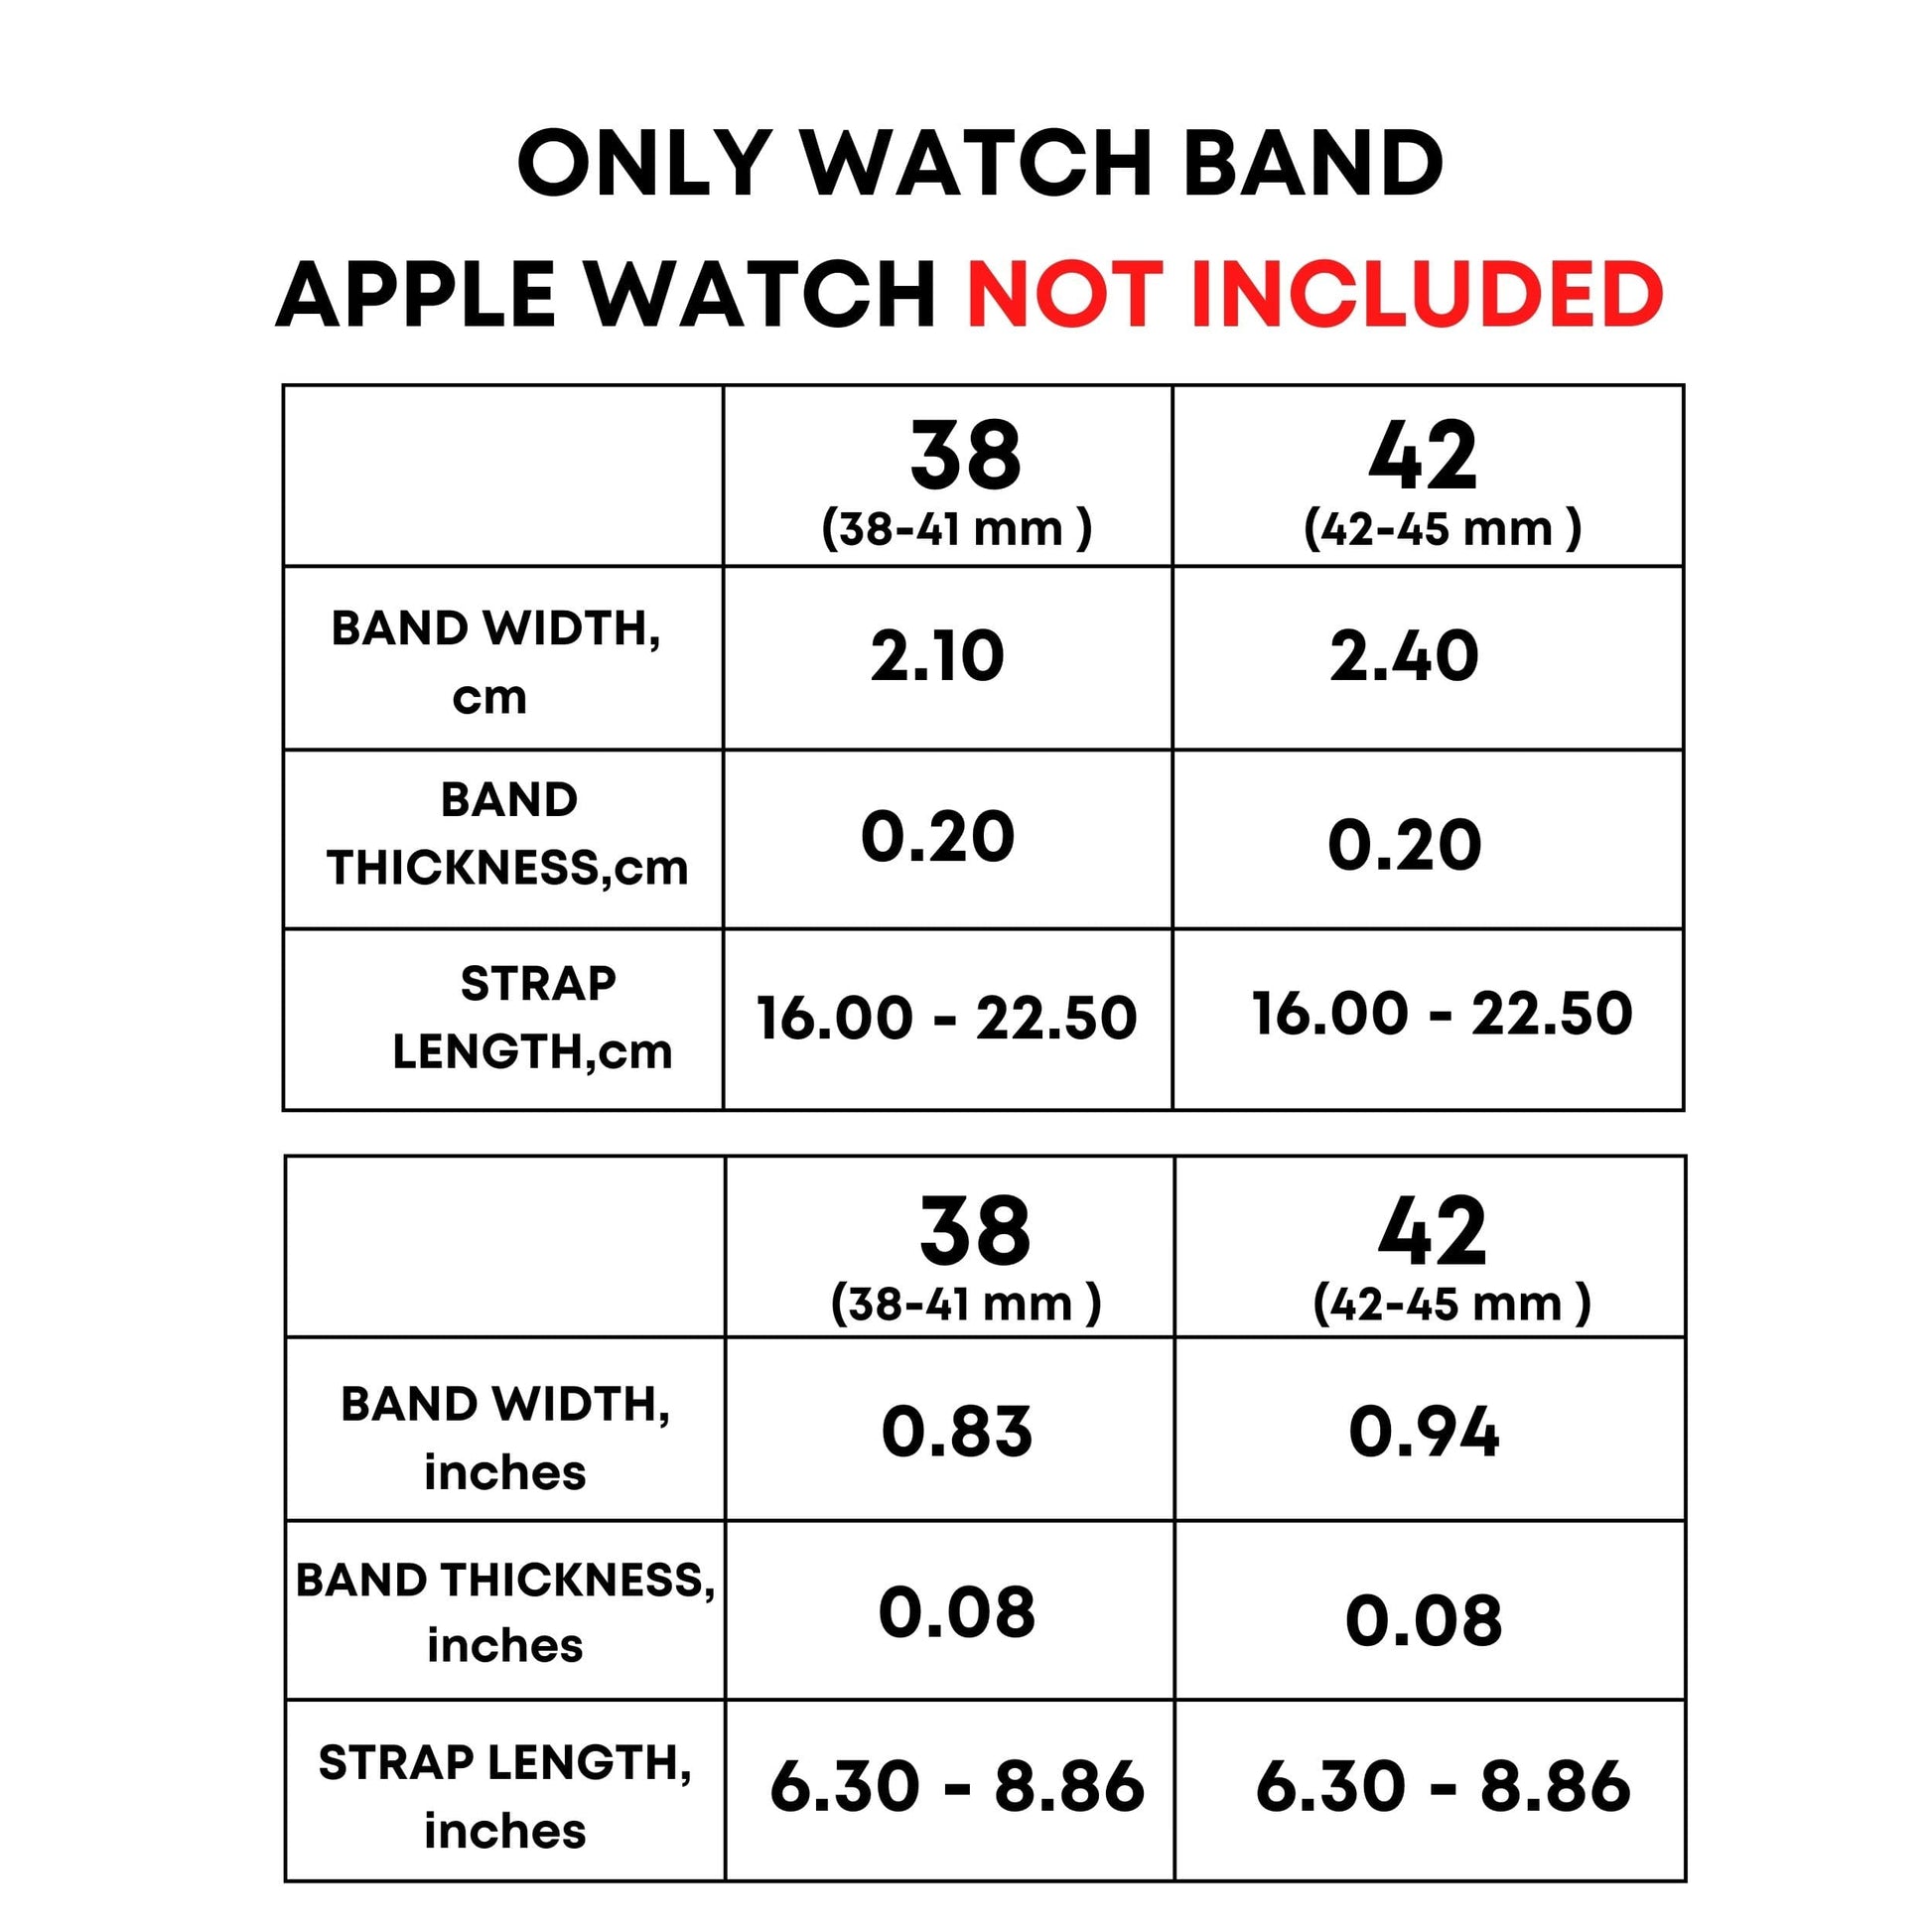 sapphic watch band for Apple iwatch, measurements